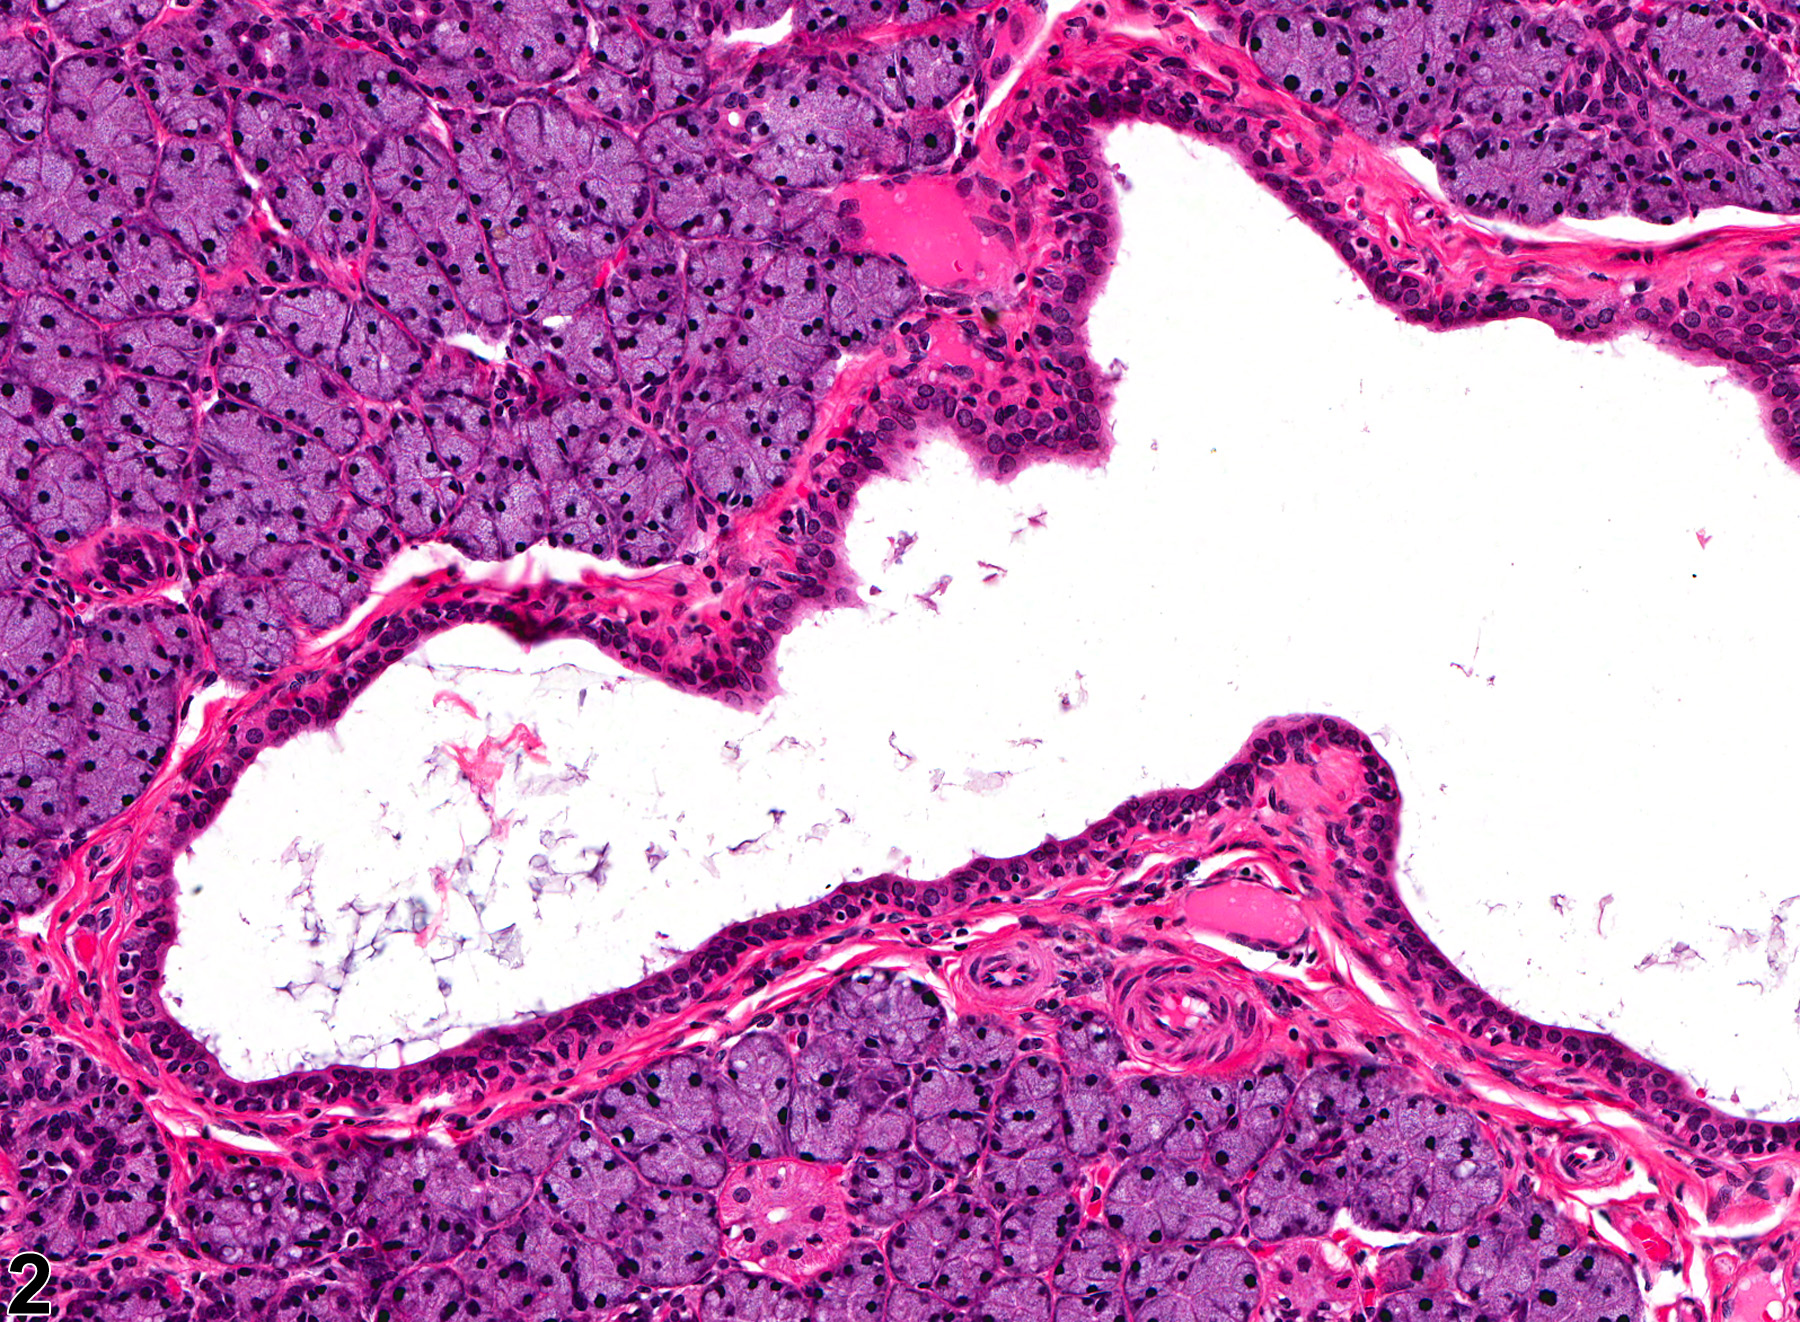 Image of dilation in the salivary gland duct from a female F344/N rat in a chronic study